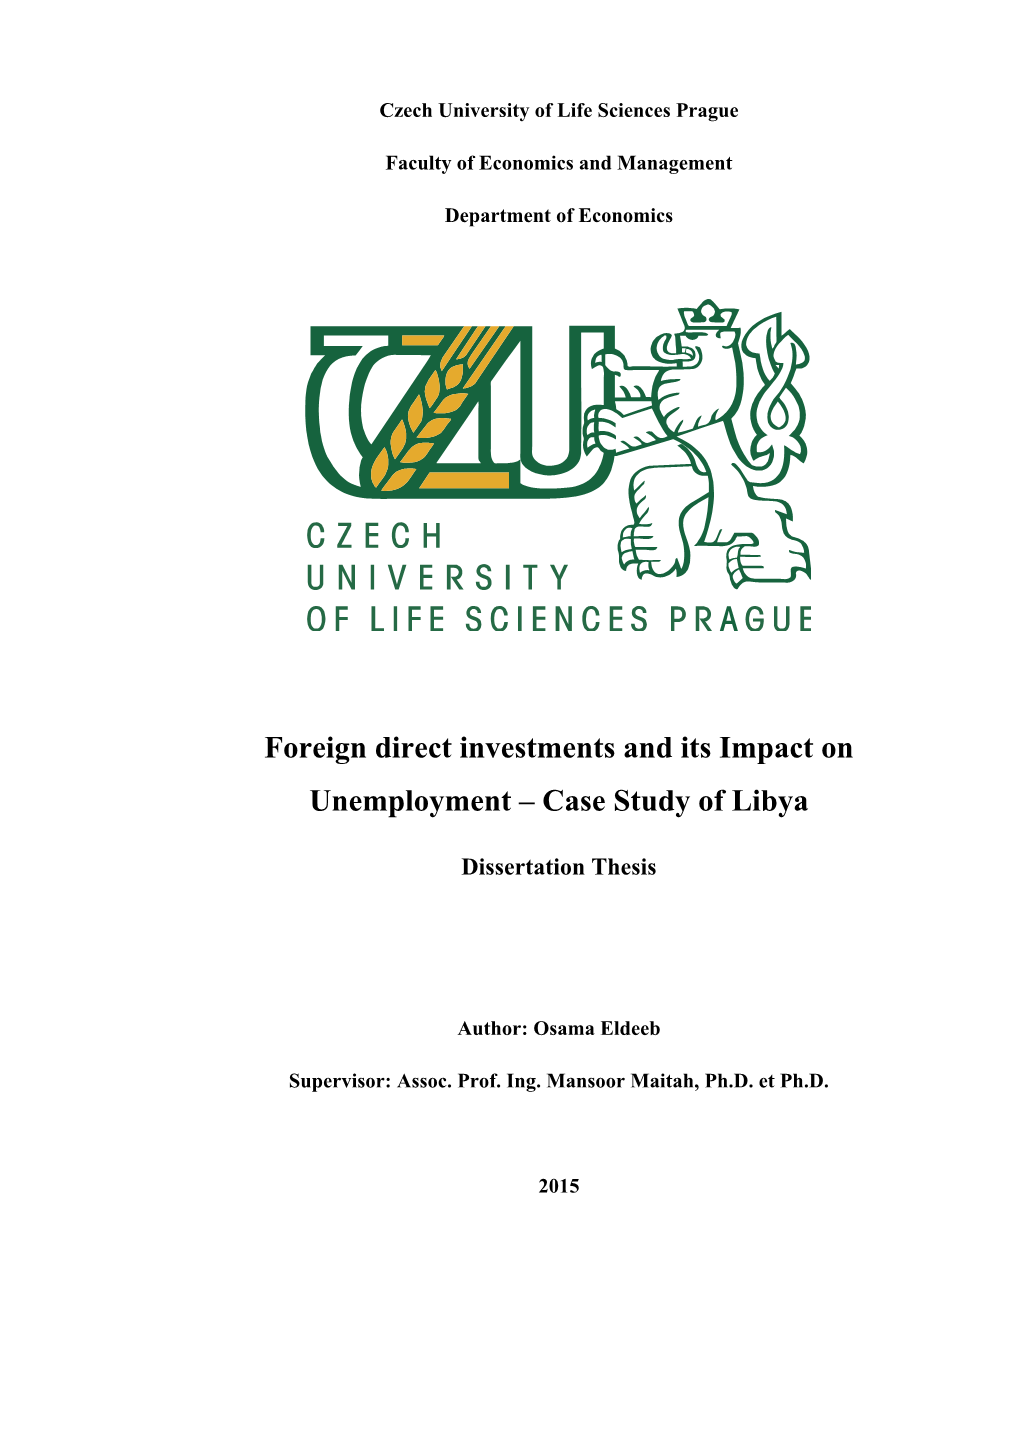 Foreign Direct Investments and Its Impact on Unemployment – Case Study of Libya